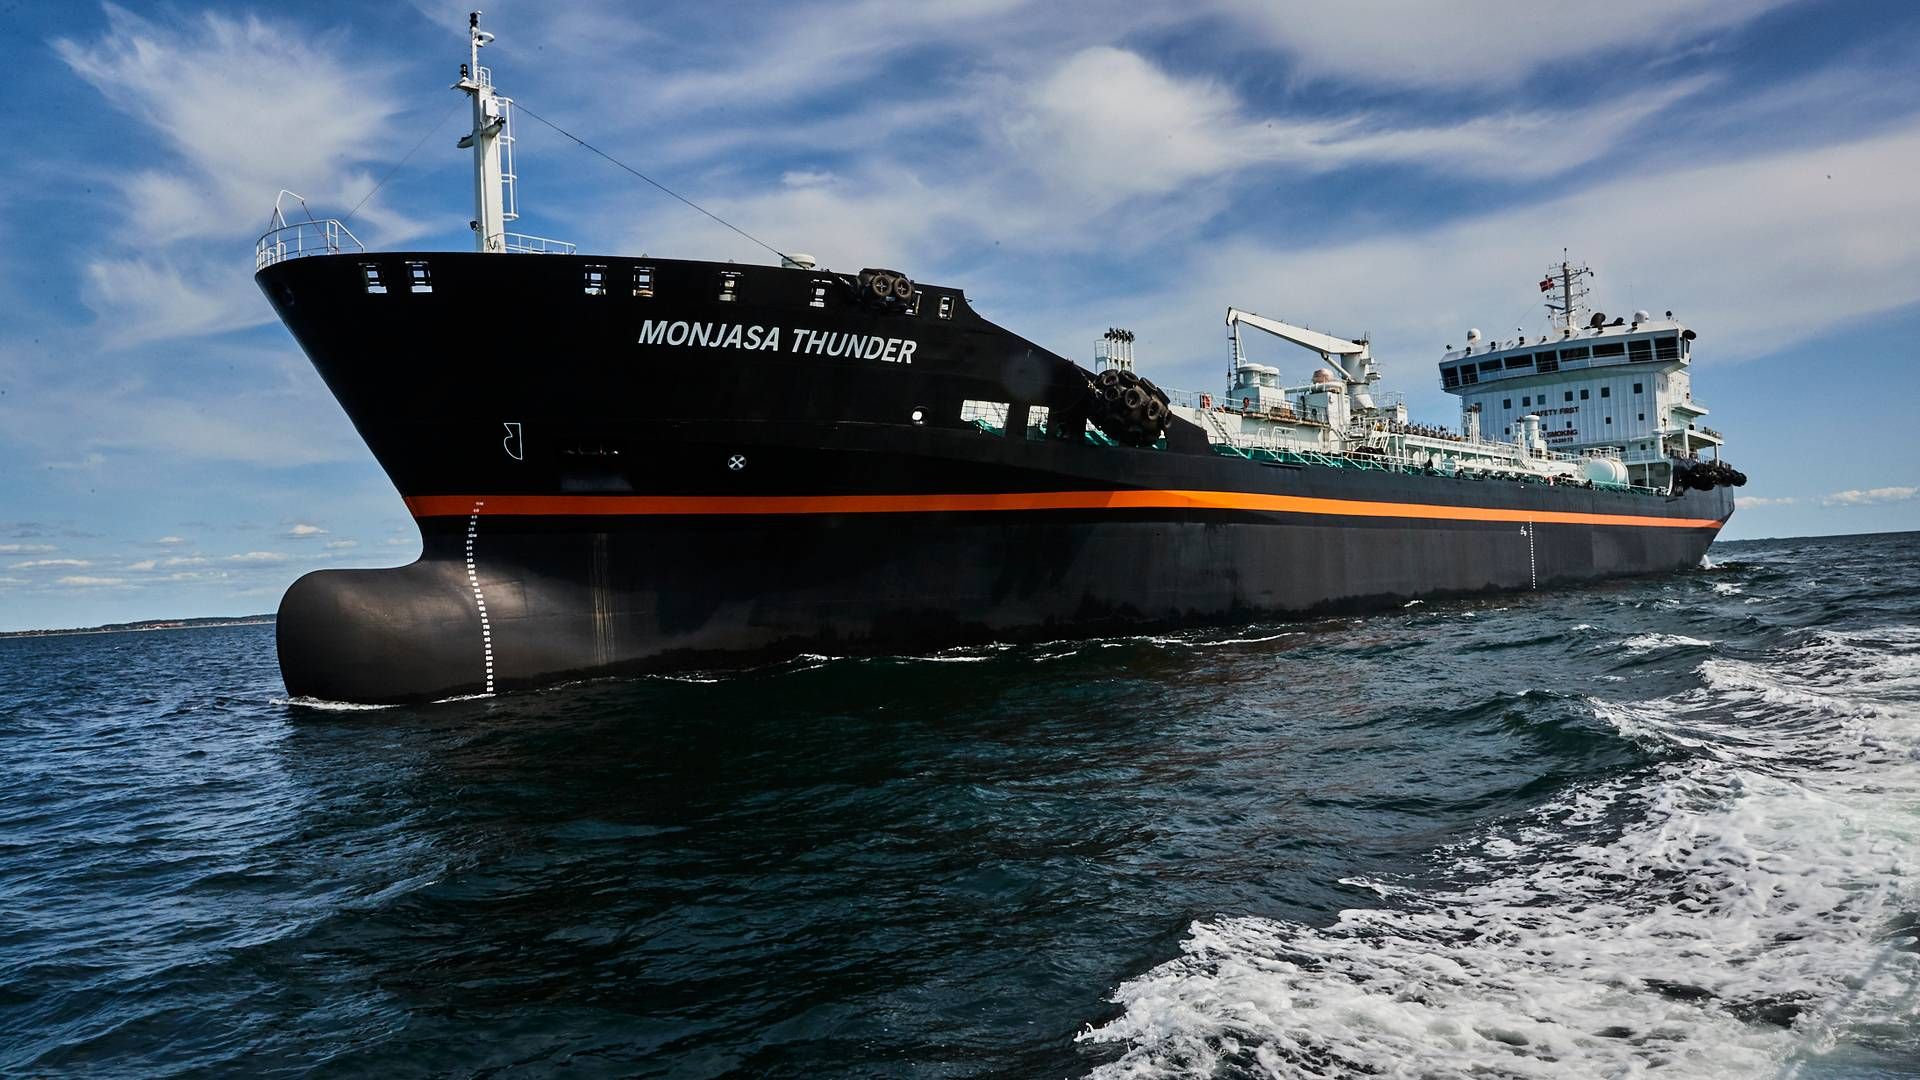 Monjasa Thunder has capacity for 20,000 tonnes and will be transporting bunker oil in West Africa. | Photo: Monjasa